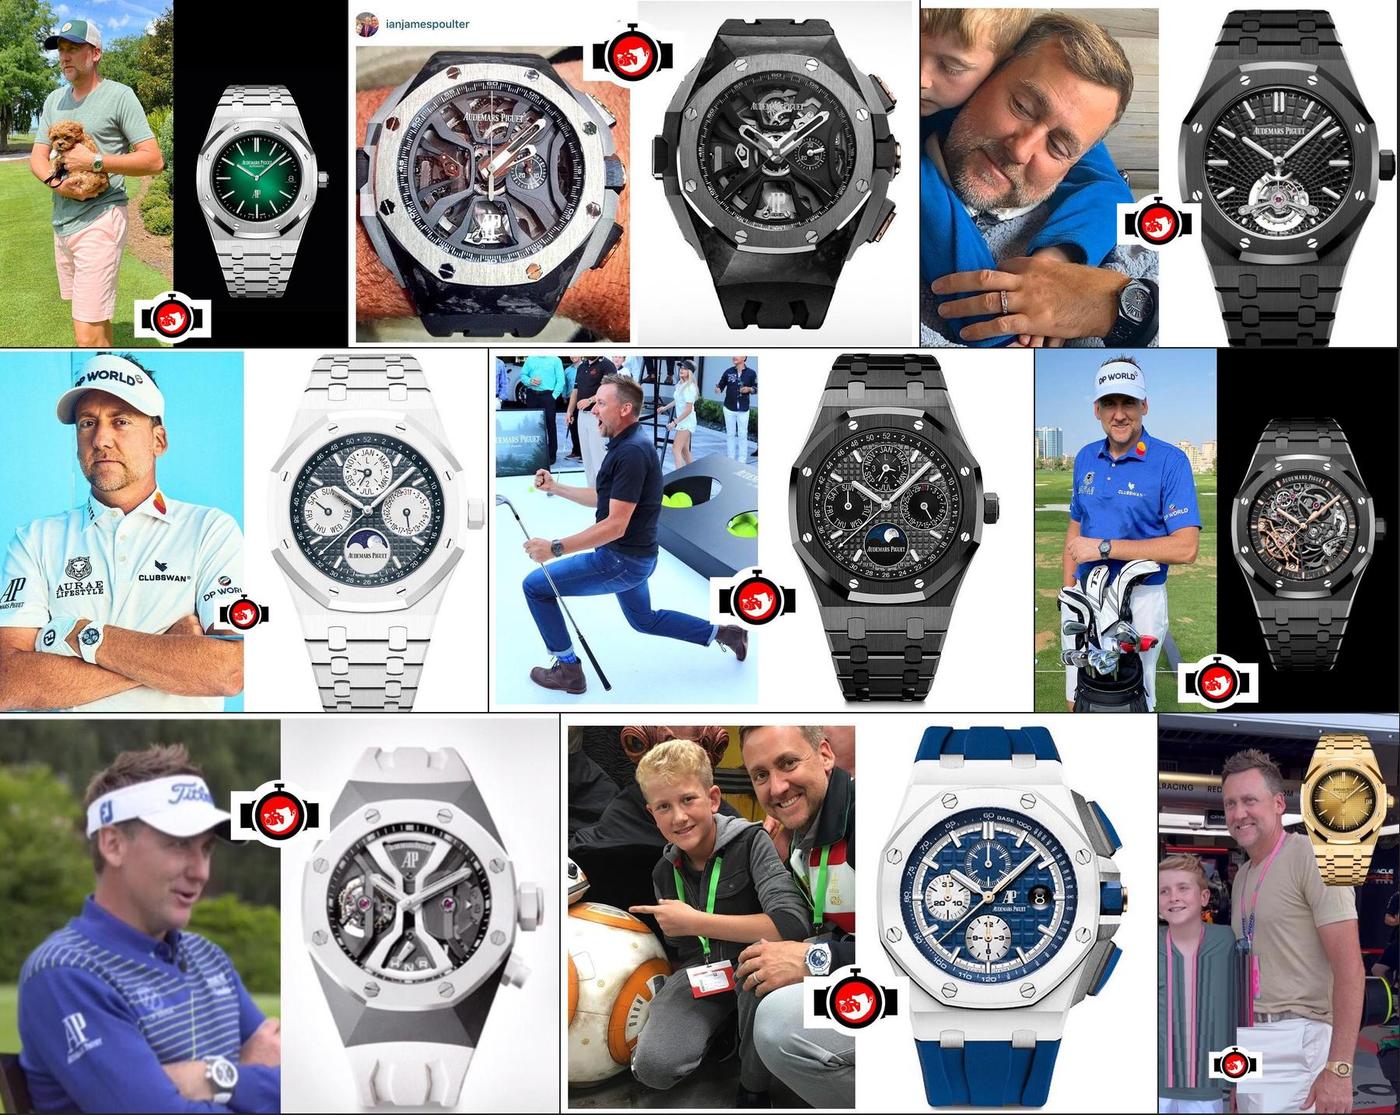 Discovering Ian Poulter's Remarkable Watch Collection | A Glimpse into the World of the Golf Pro